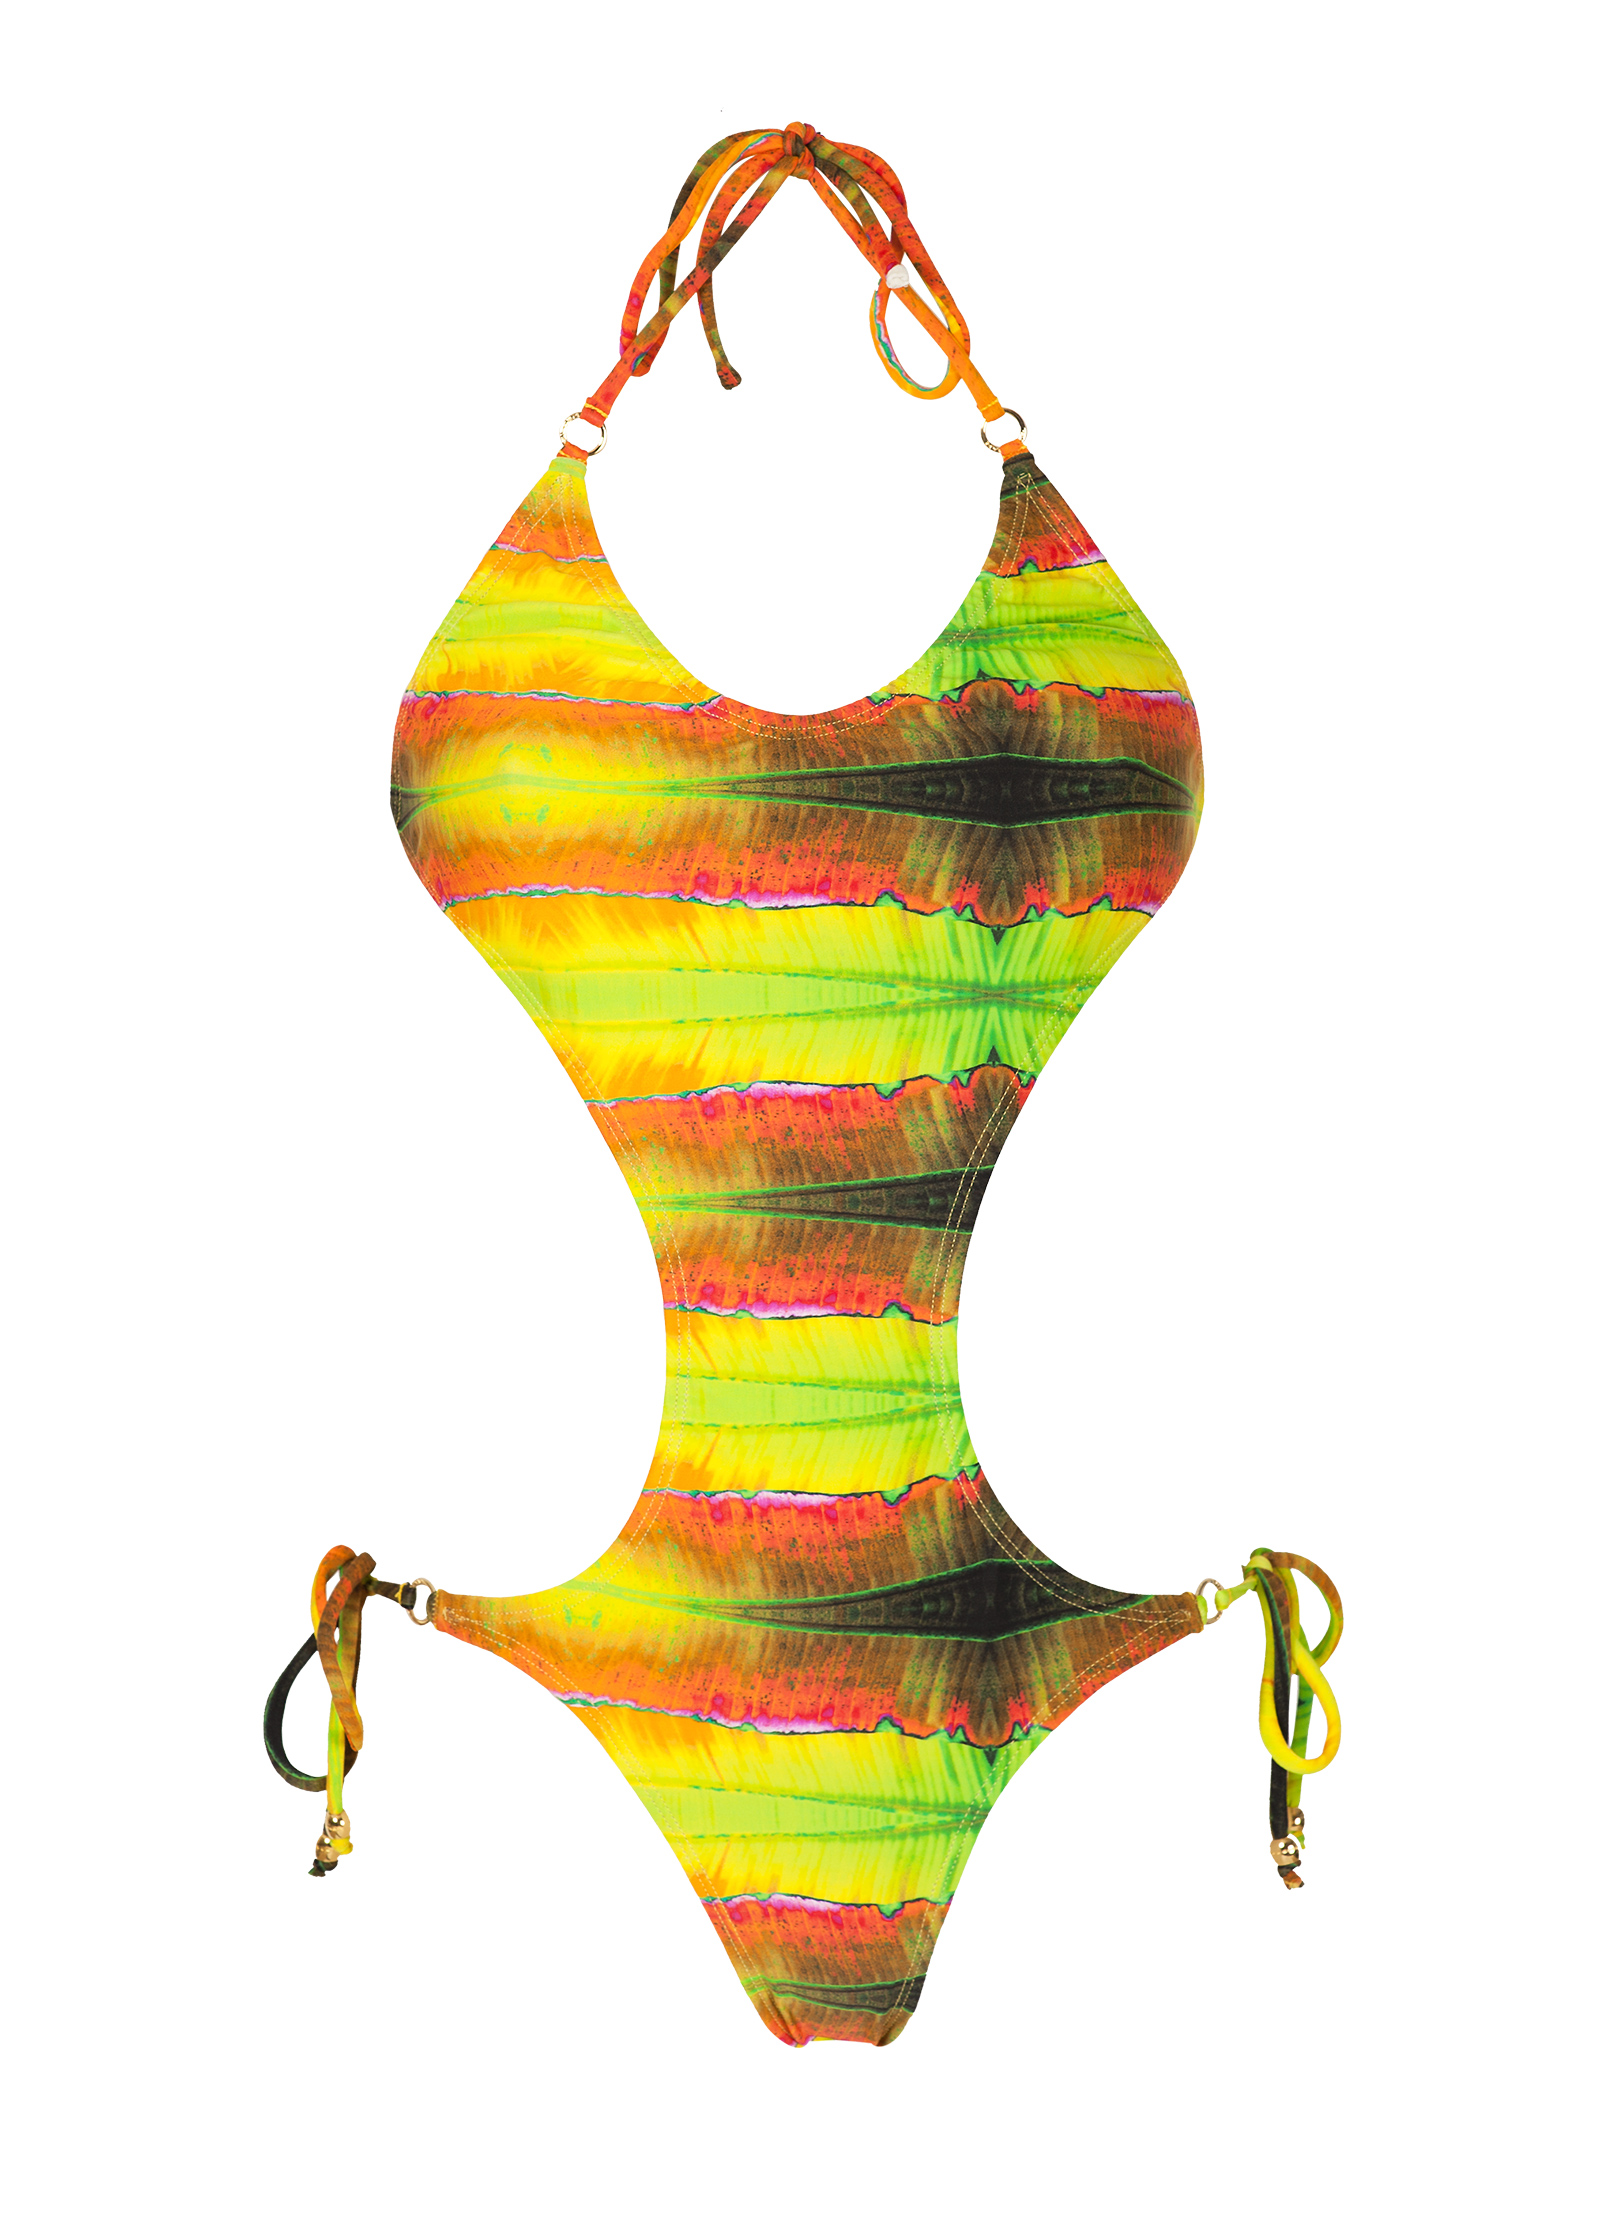 A Printed Trikini With A Yellow, Green And Orange Gradient - Stop Light